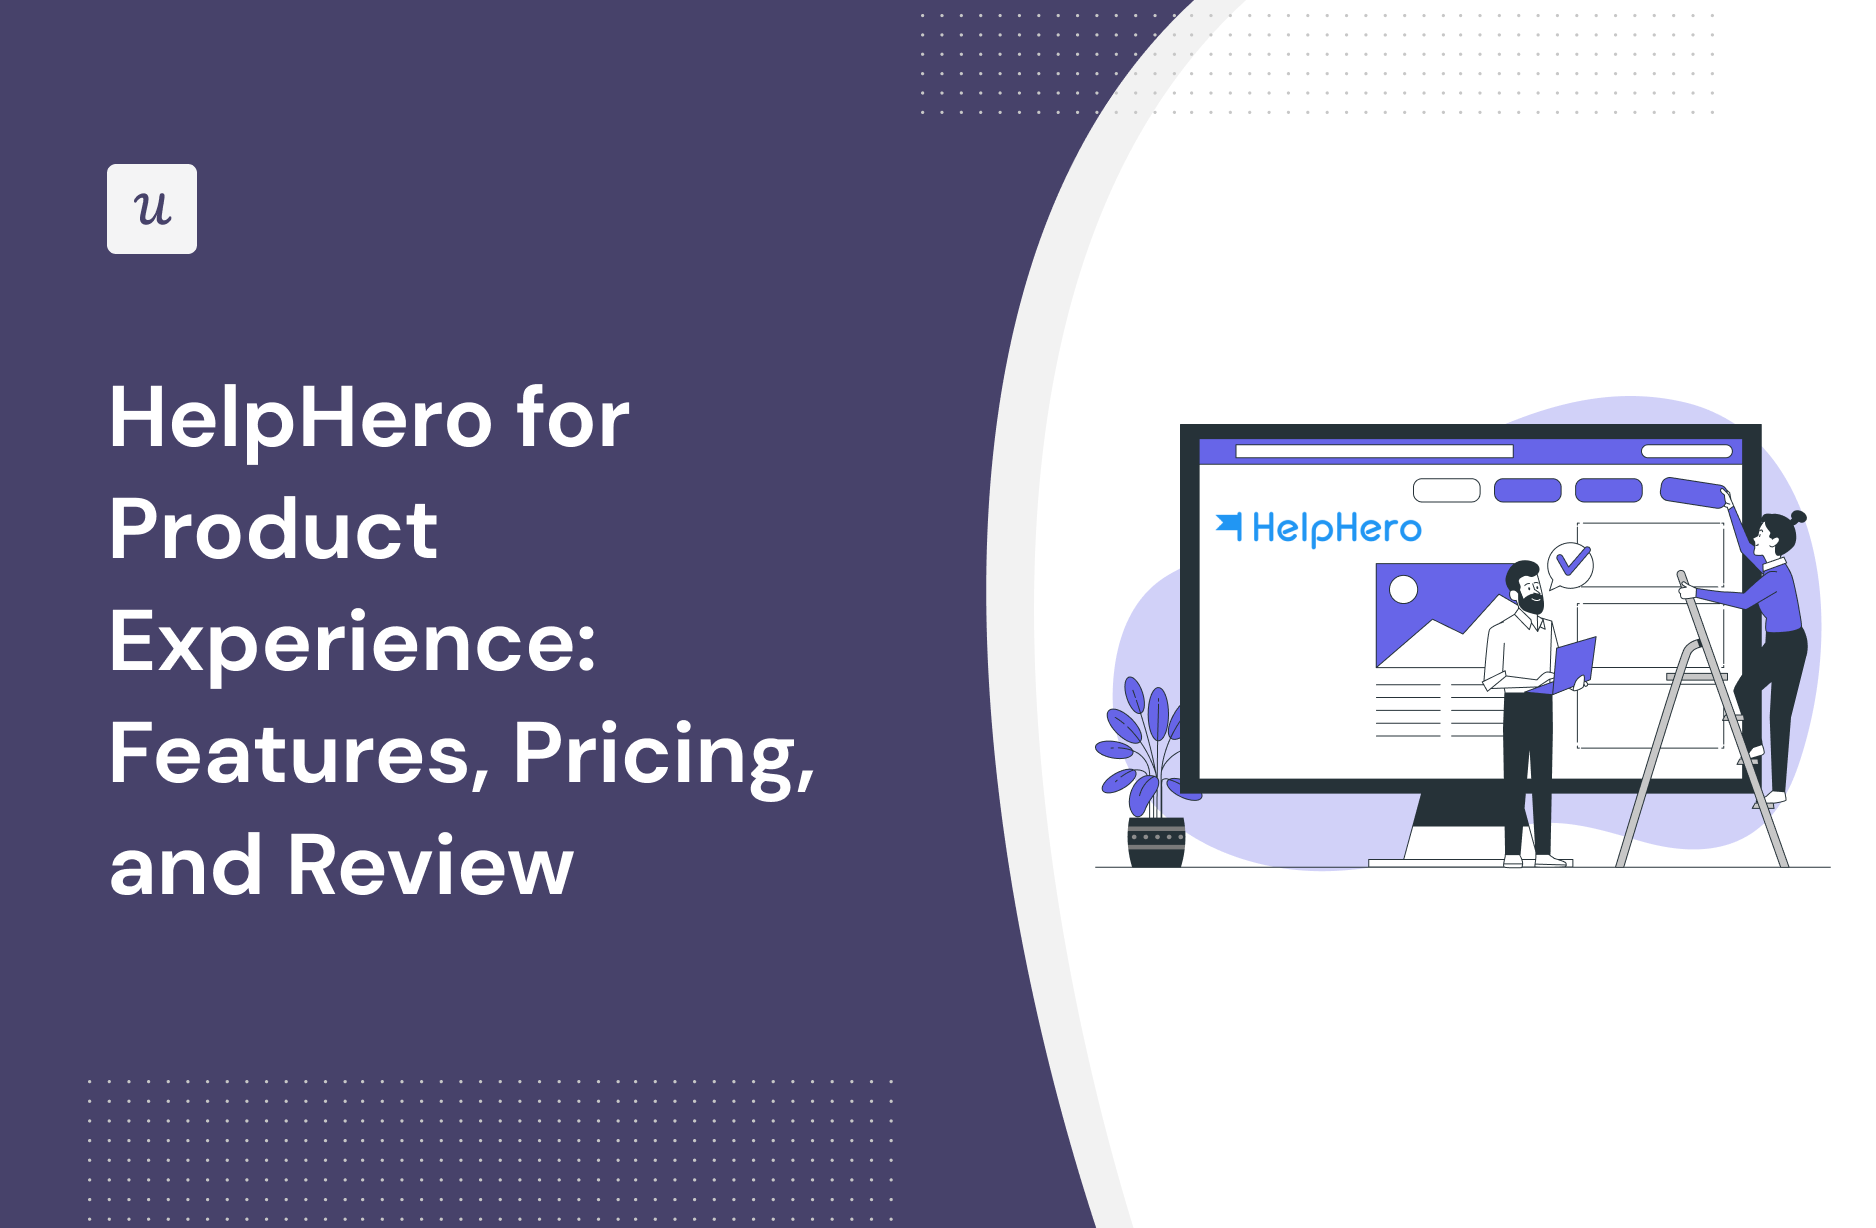 HelpHero for Product experience: Features, Pricing, and Review